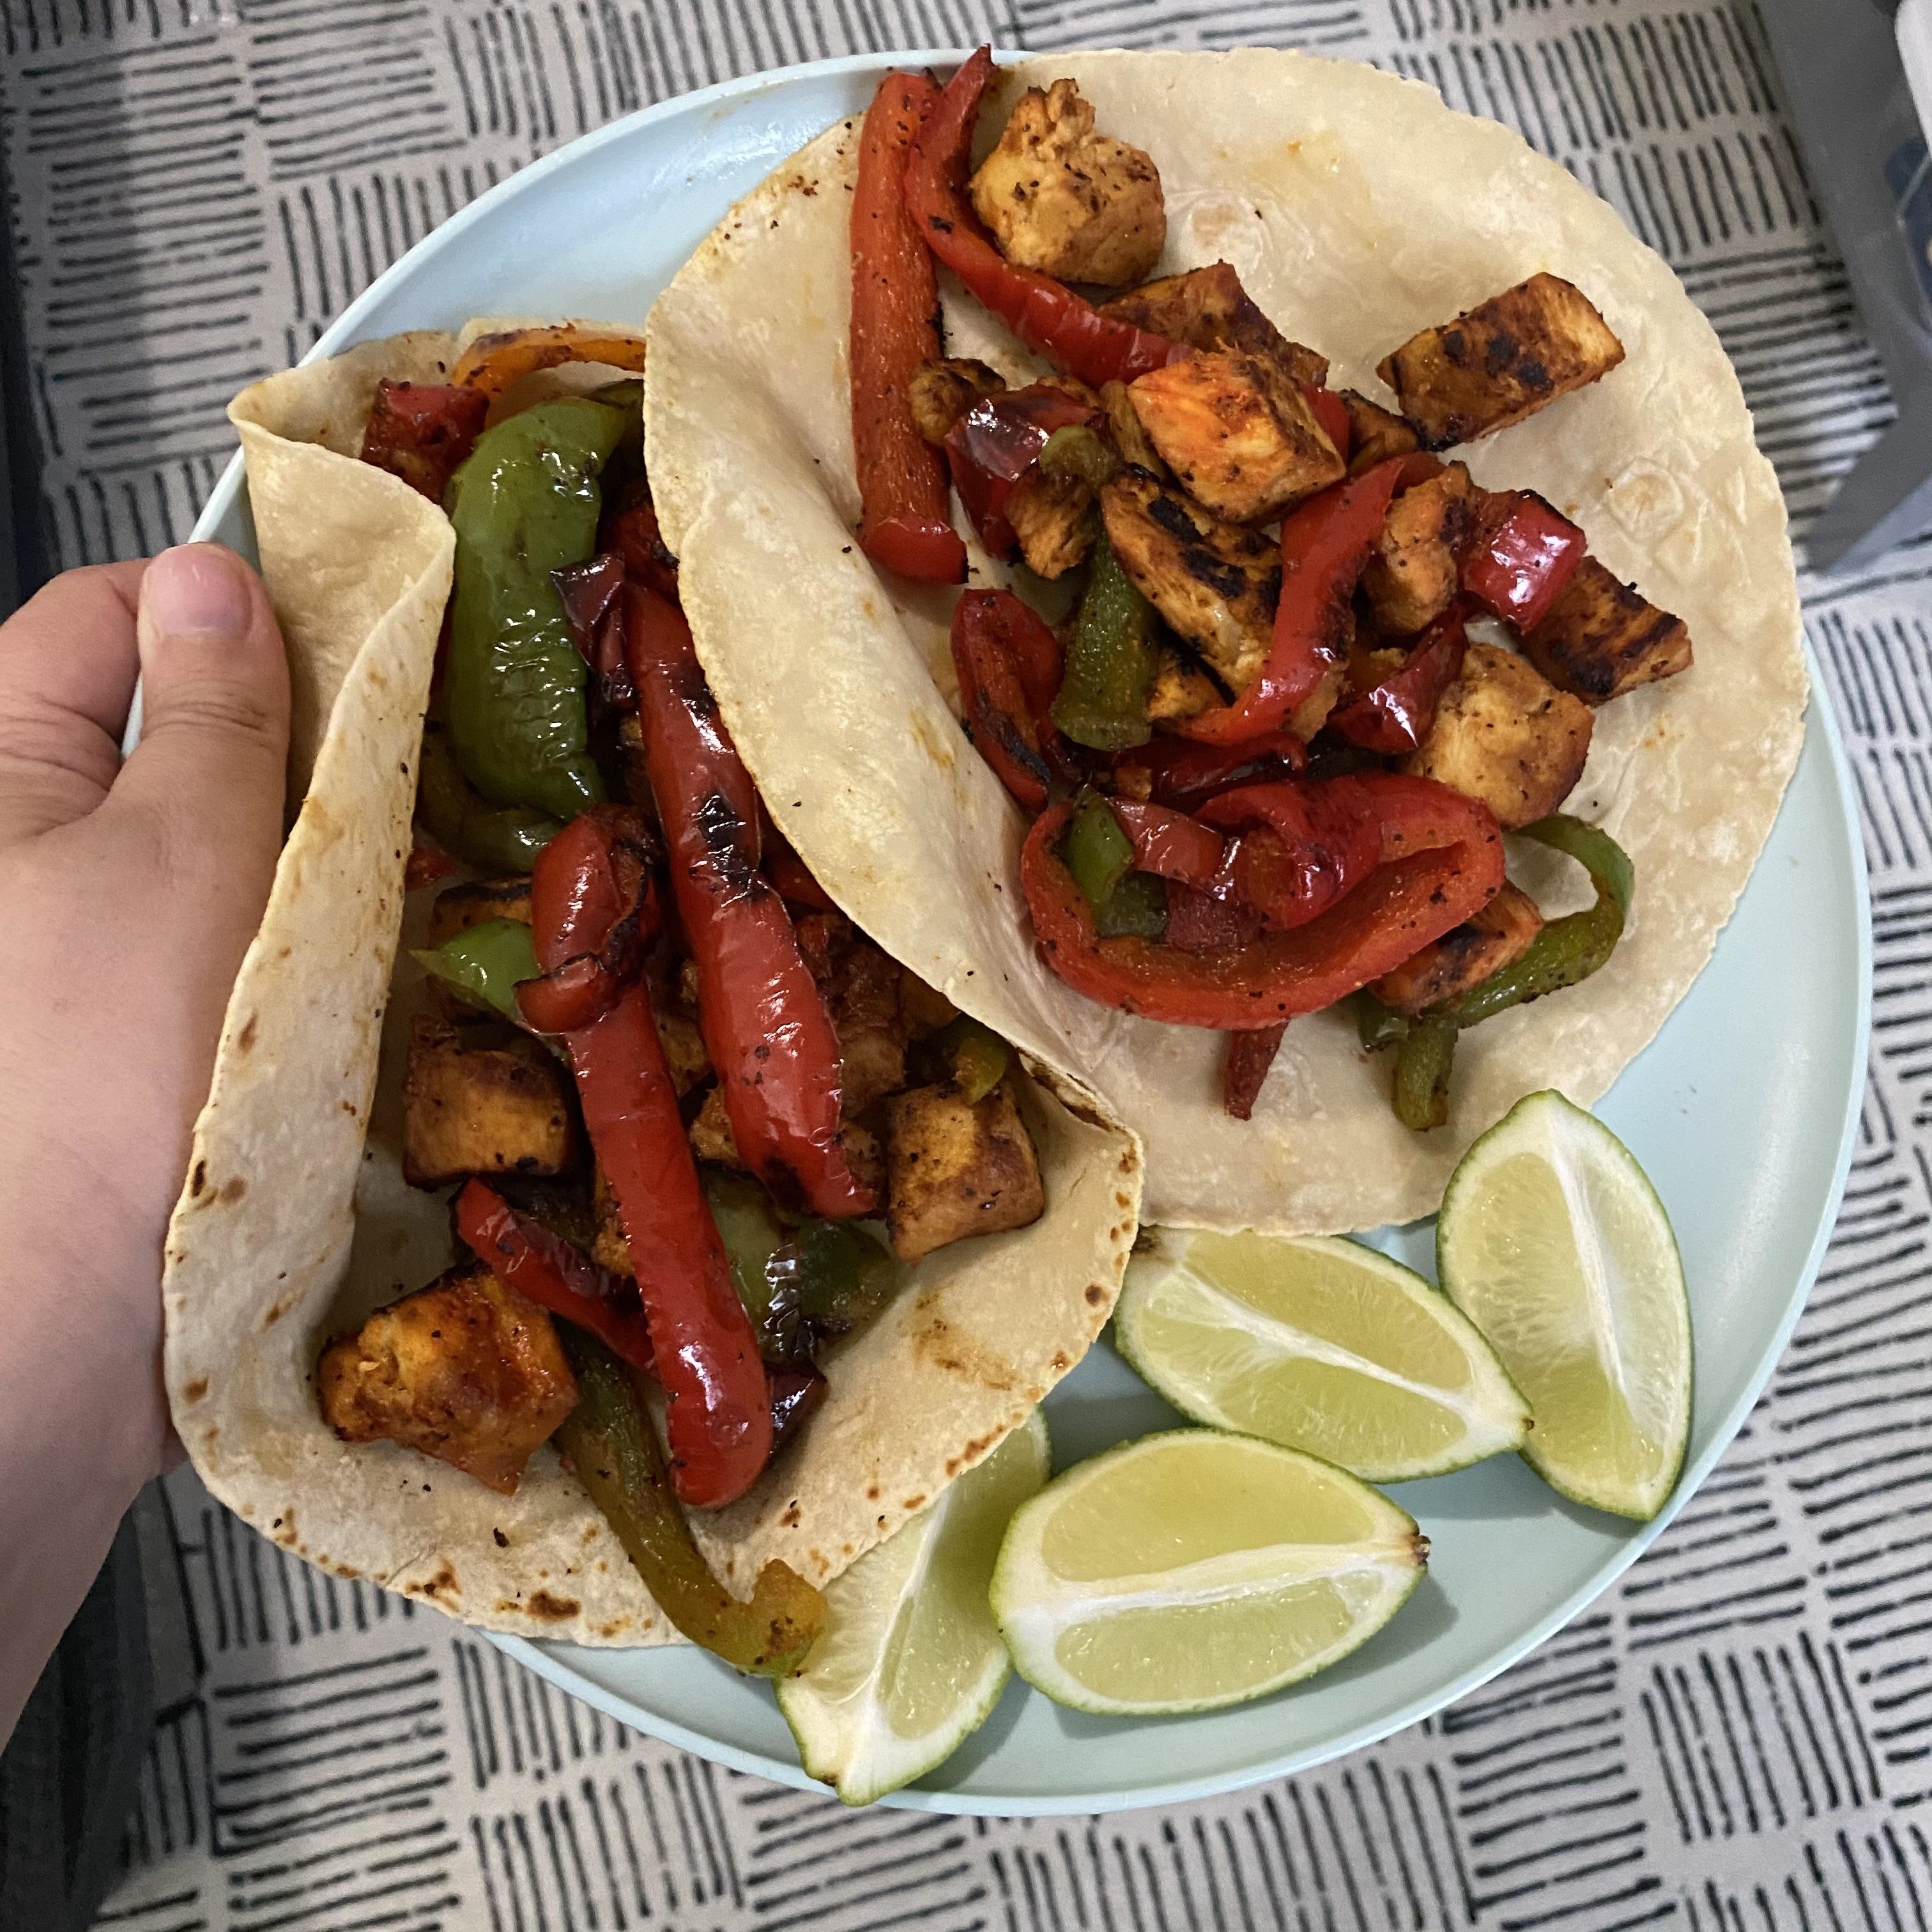 Hand holding two tacos filled with grilled chicken and bell peppers, with lime wedges on the side